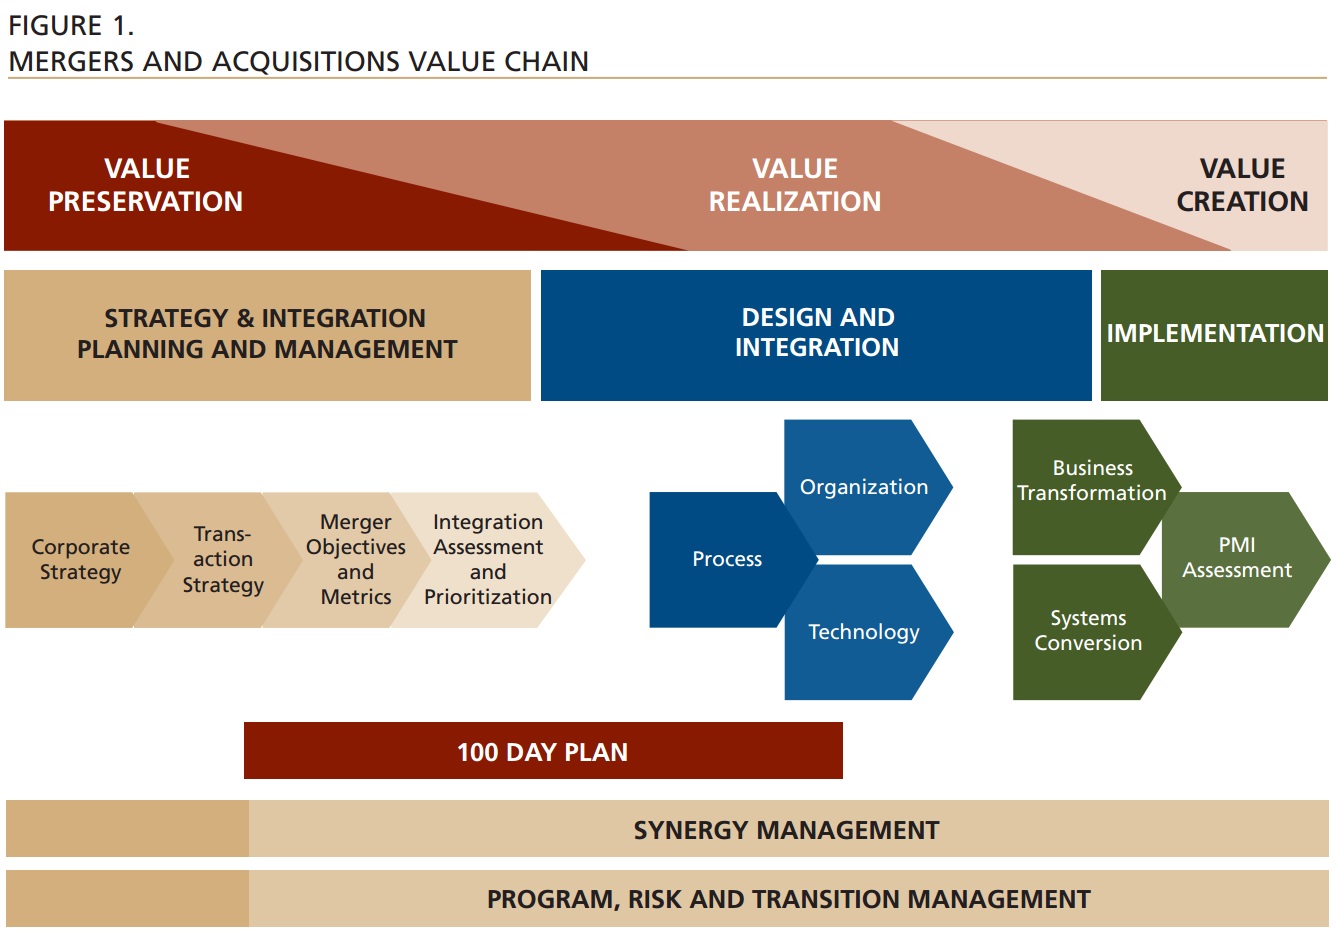 Figure 1 - MERGERS AND ACQUISITIONS VALUE CHAIN